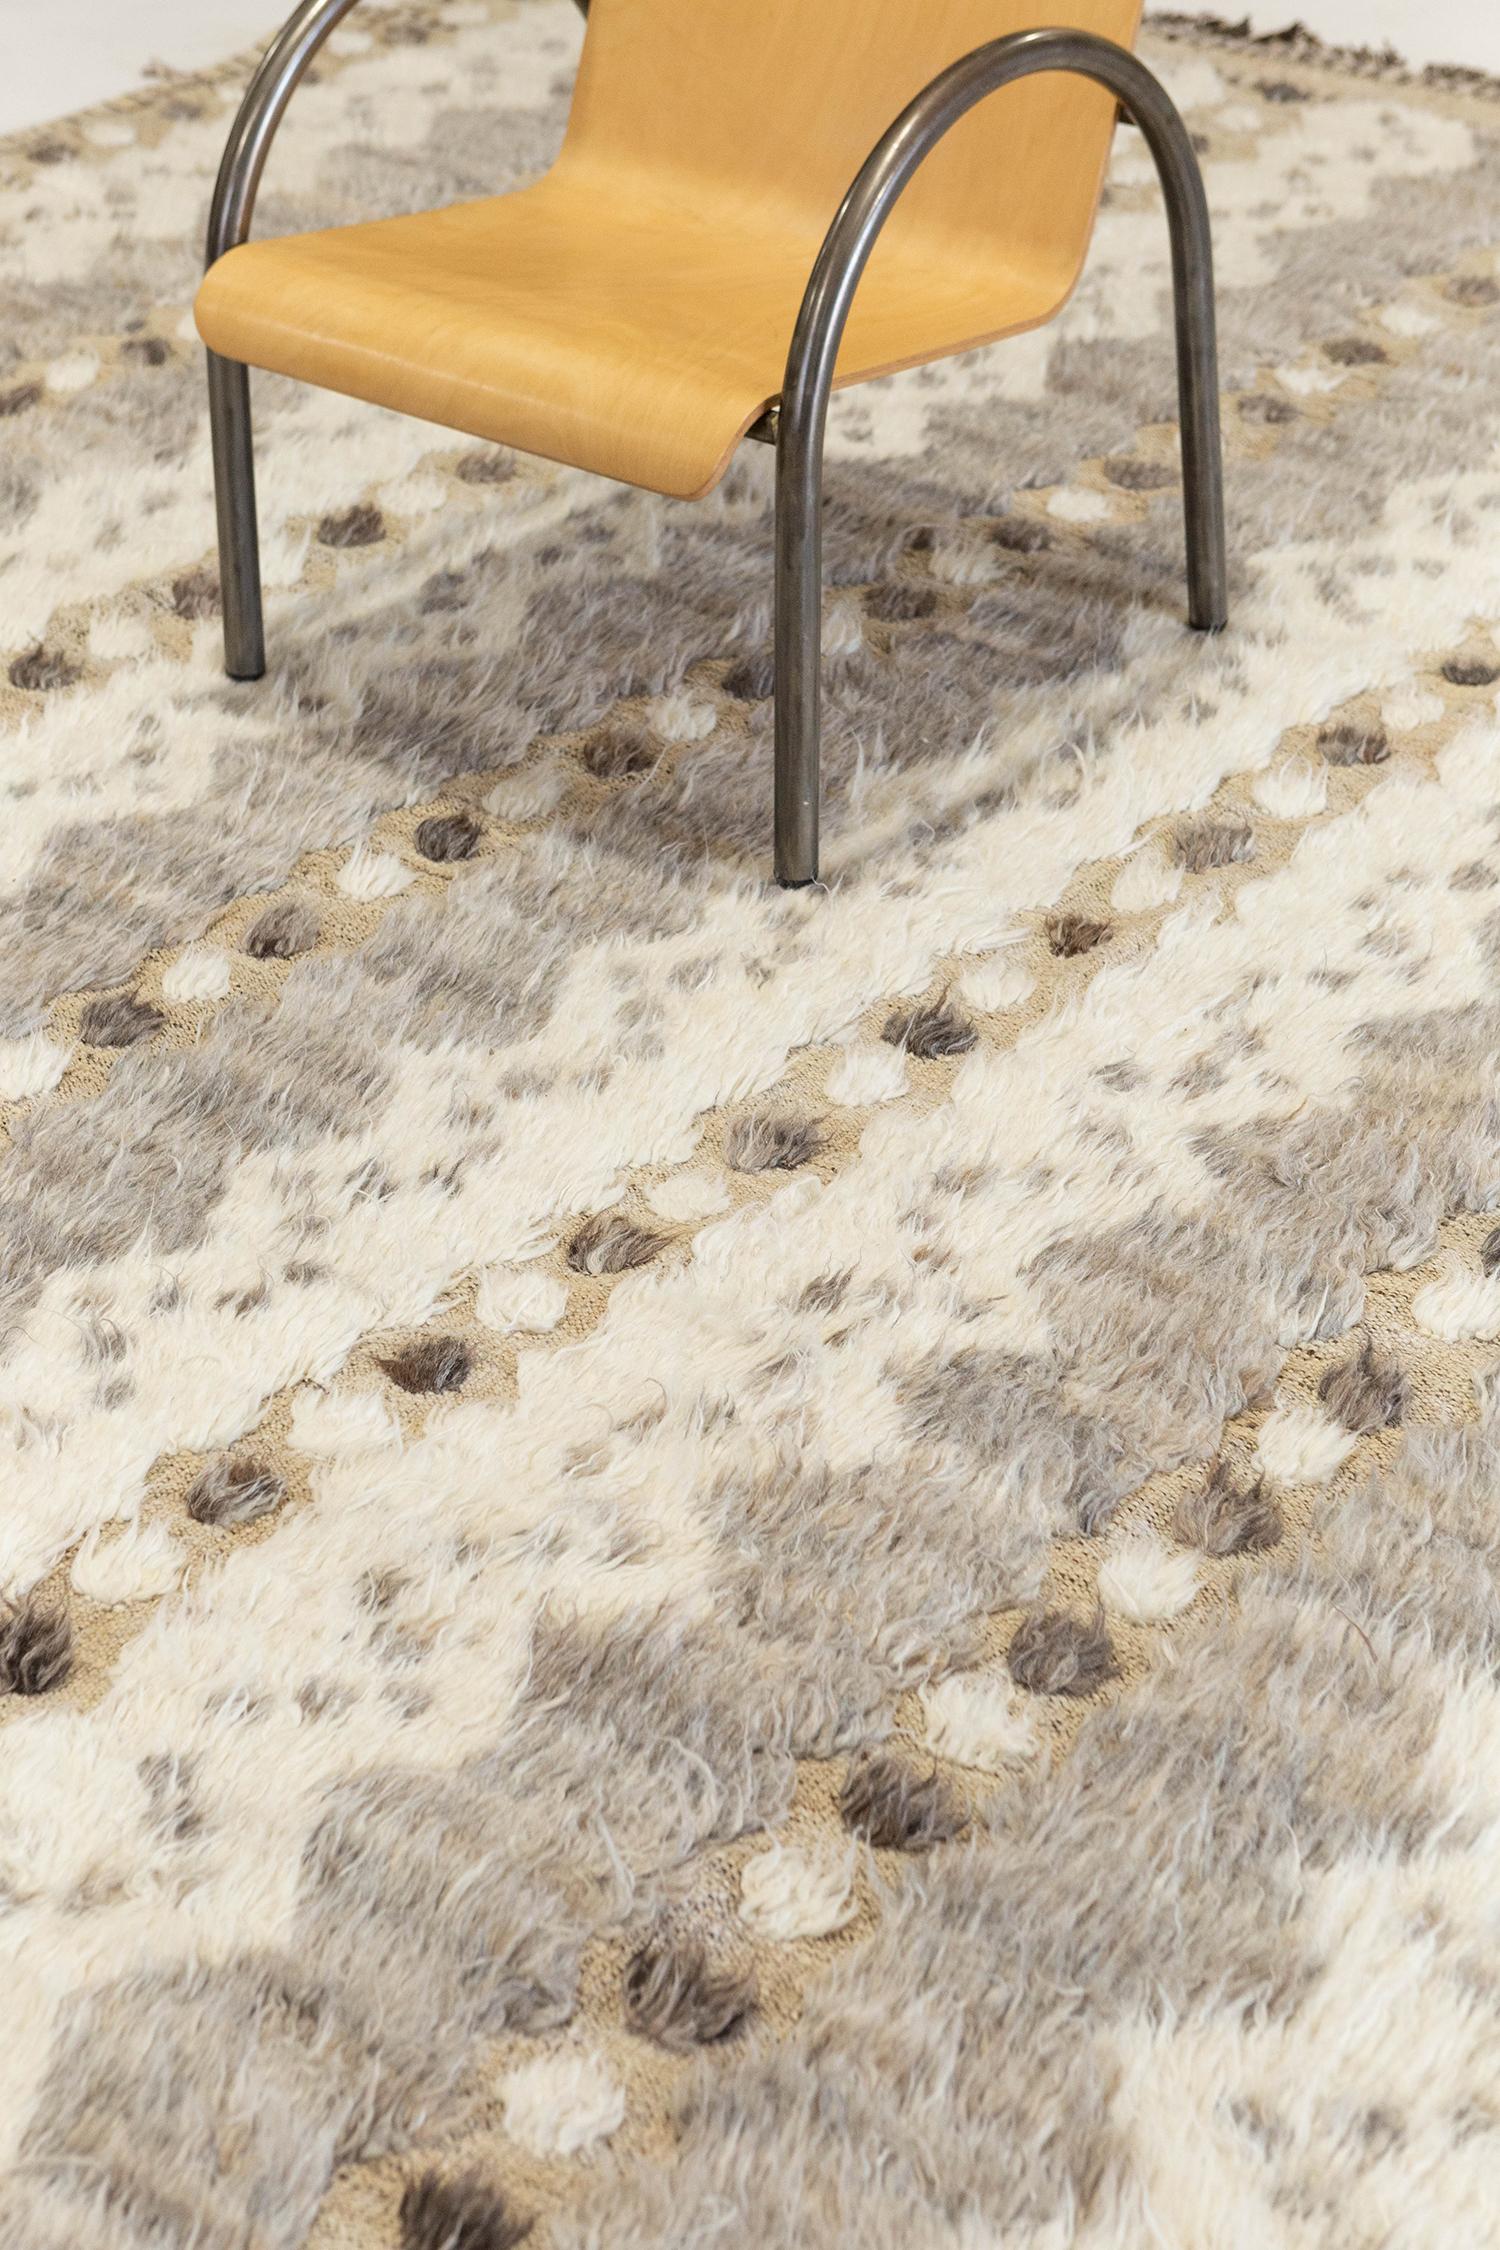 The 'Modlina' rug is a handwoven wool piece inspired by vintage Scandinavian design elements and recreated for the modern design world. The rug's shag balance and harmony, hand woven with a tan flat weave and piles of taupe and ivory. This